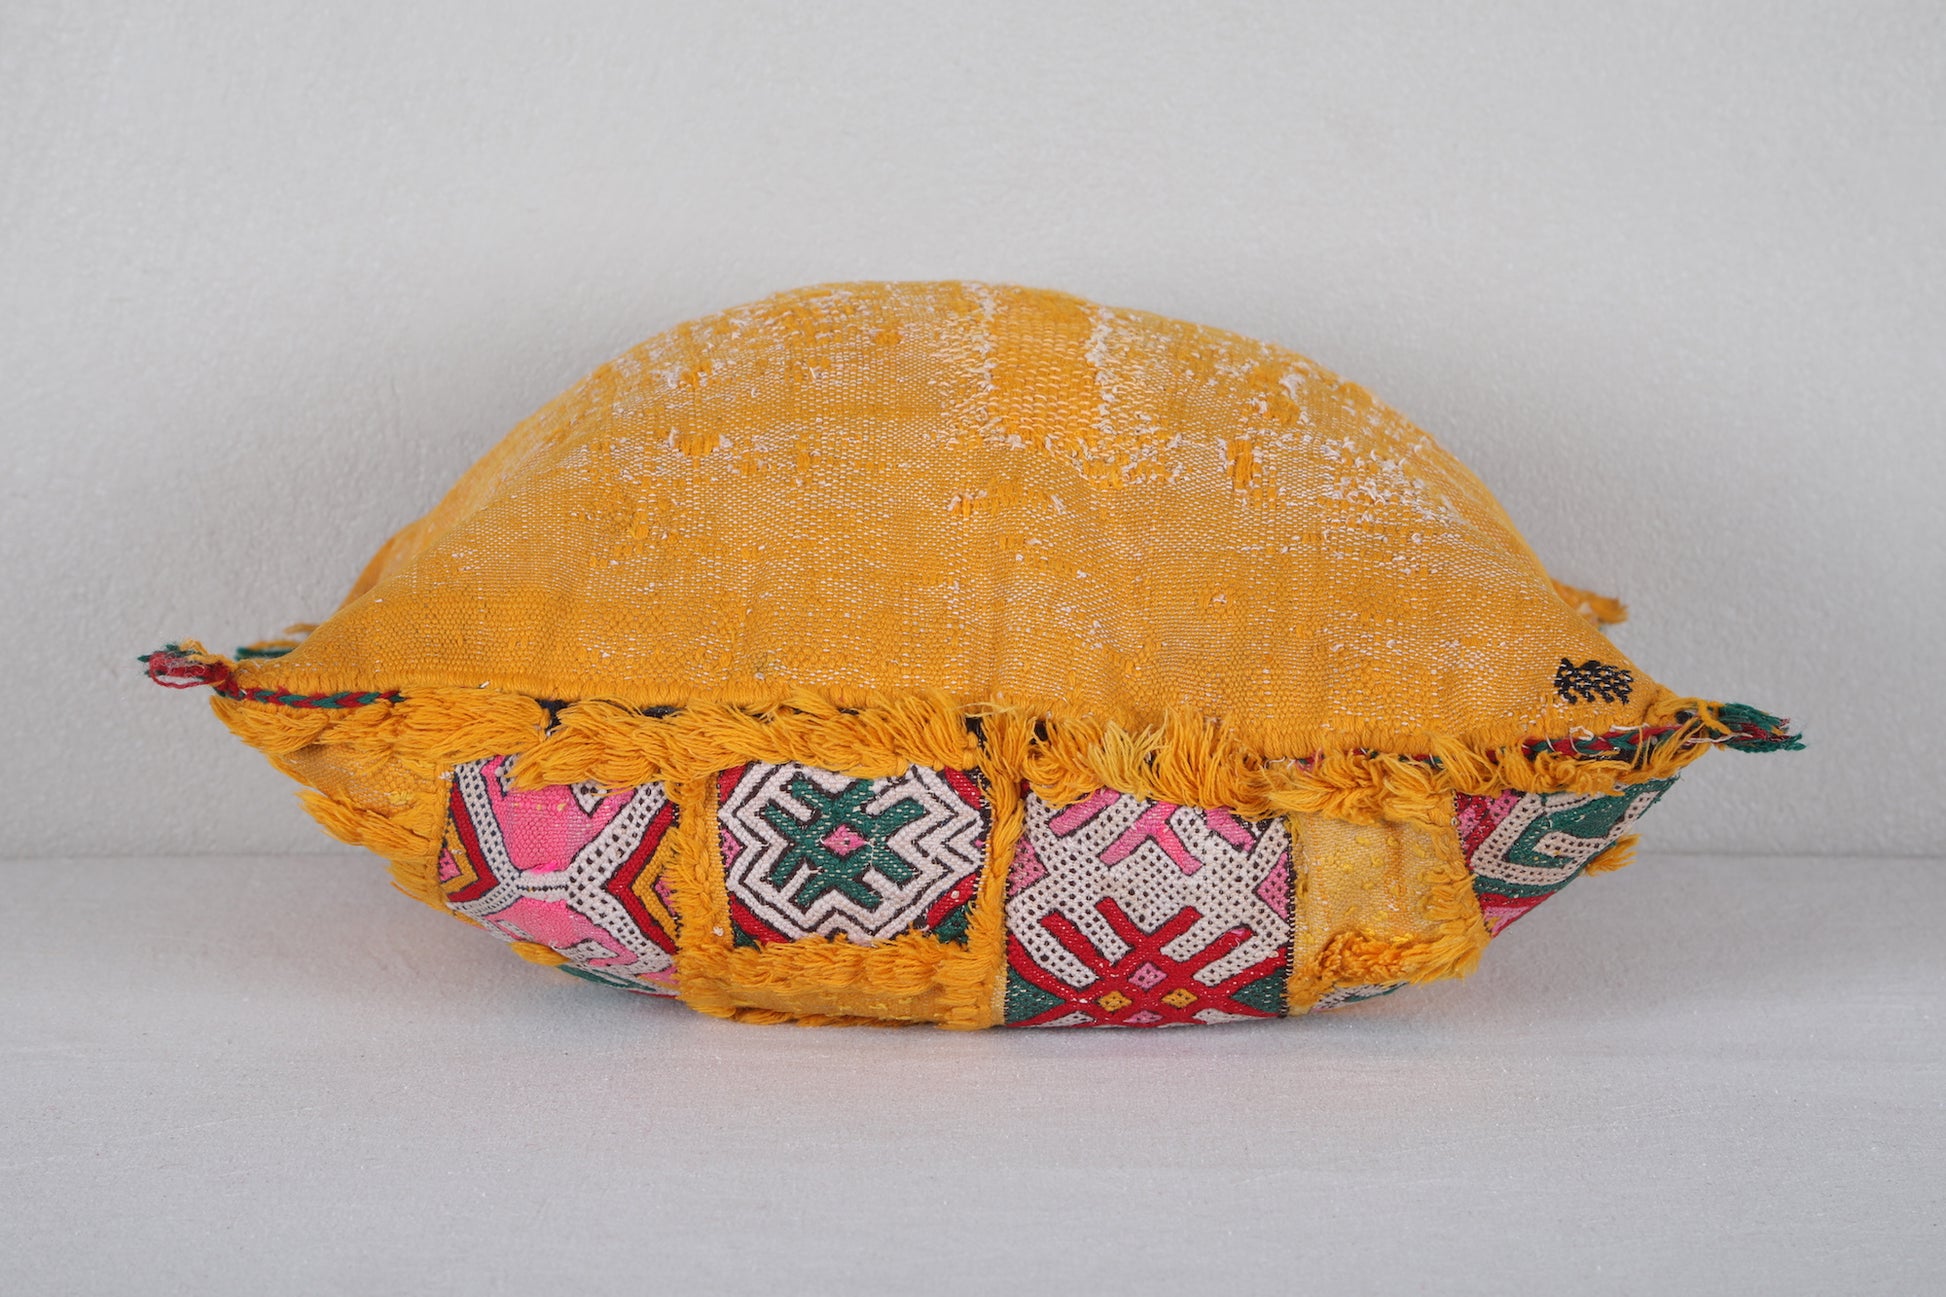 Yellow berber tribal pillow 16.5 INCHES X 18.5 INCHES